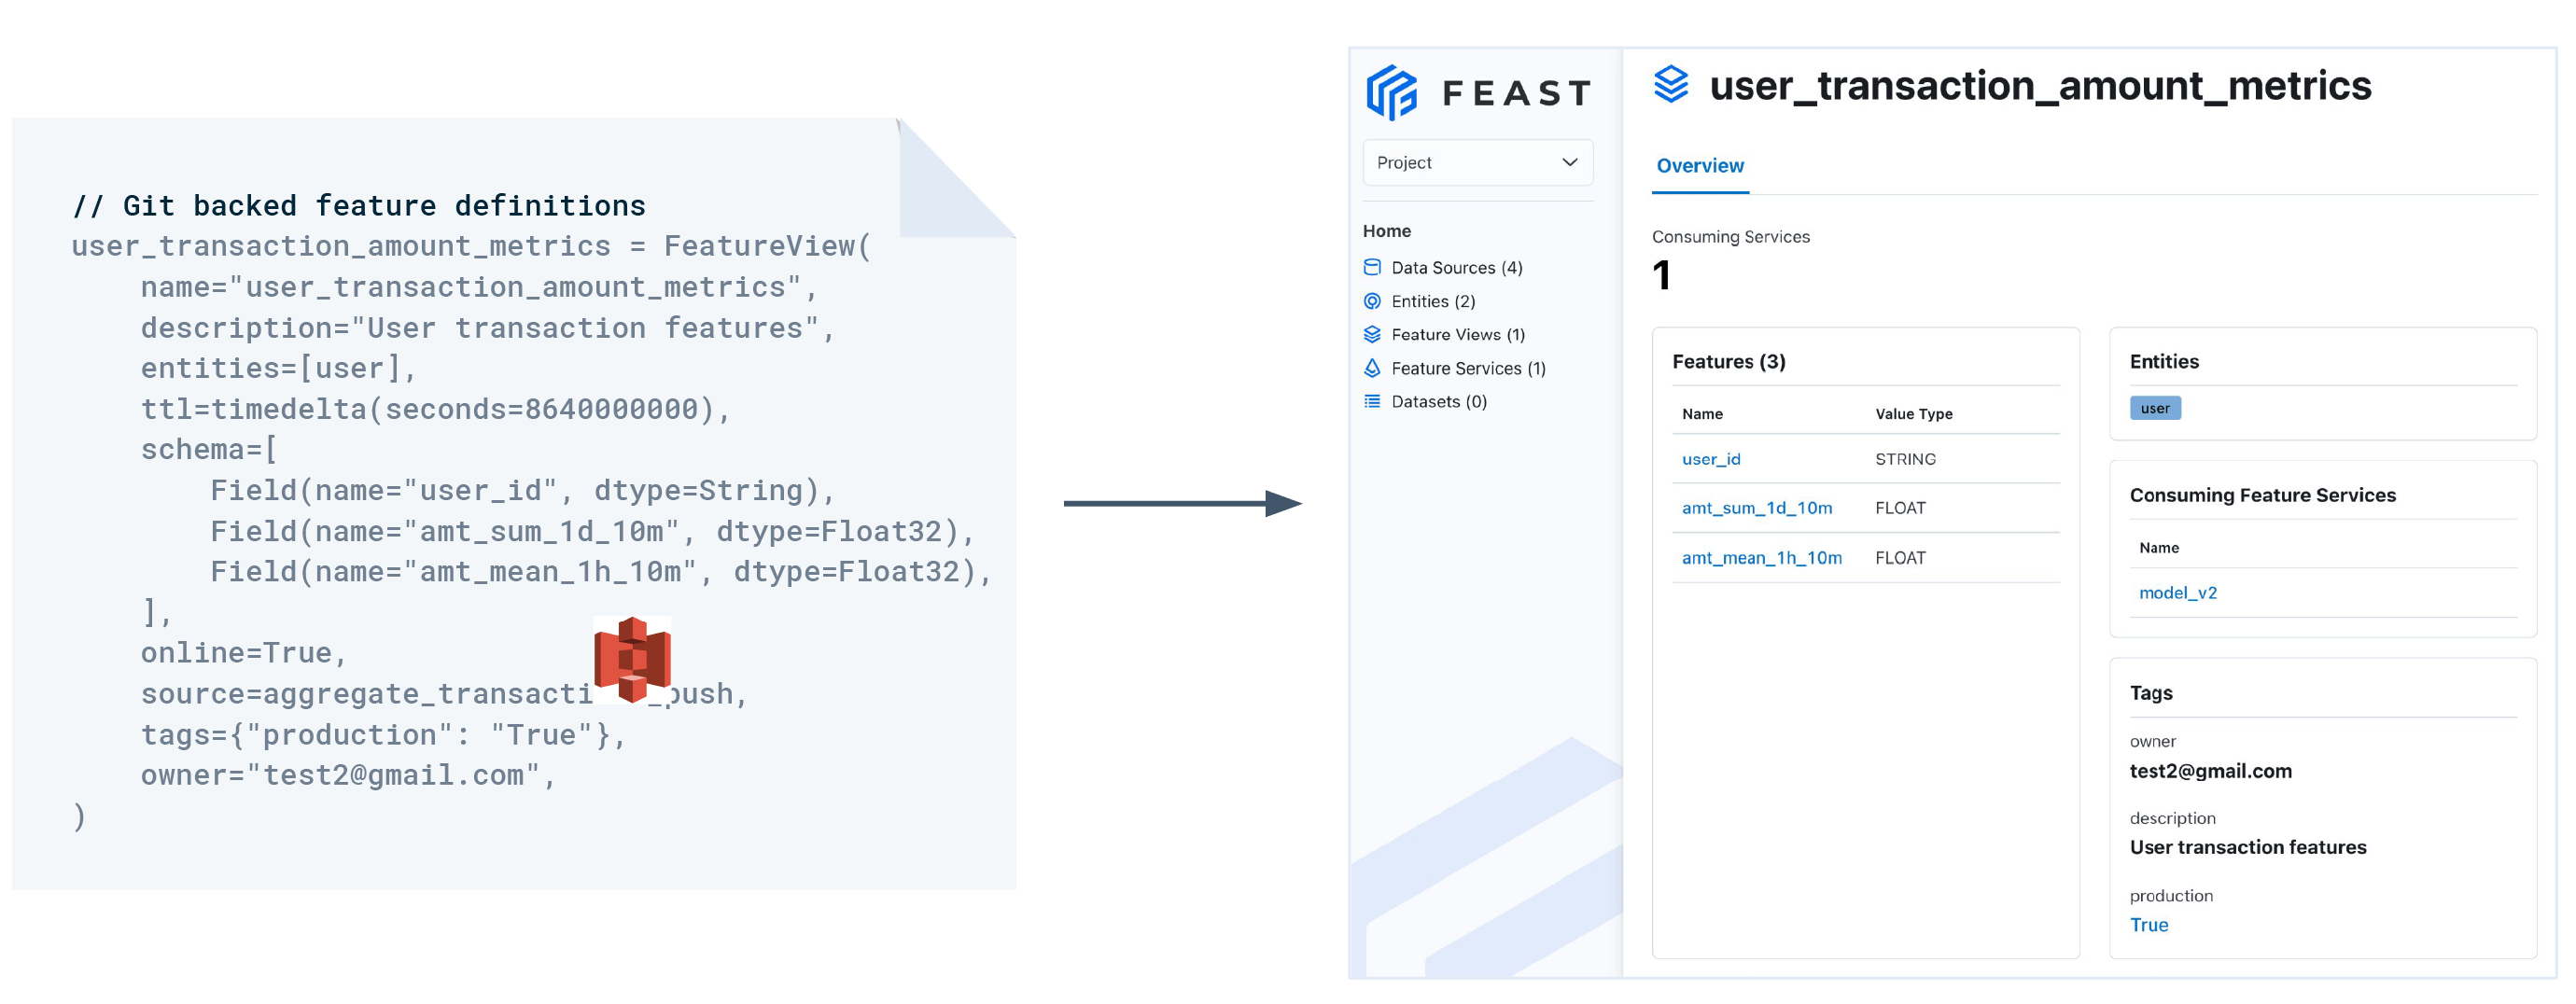 Diagram of data transformation pipelines in feast.